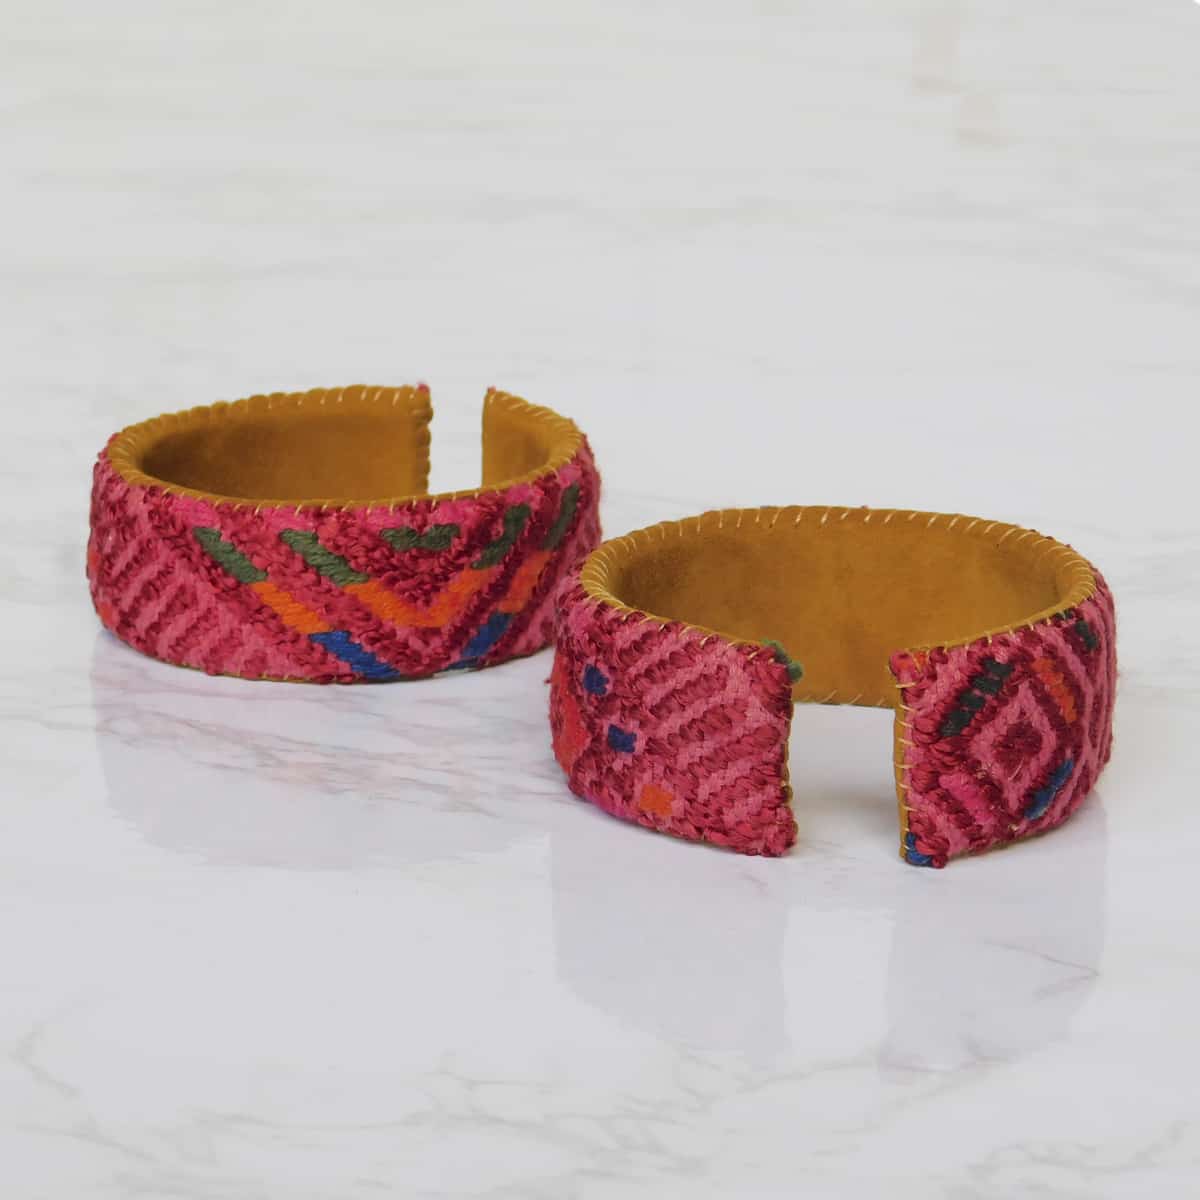 A set of two red cuff bracelets with red woven fabric with diamonds woven onto a leather backing